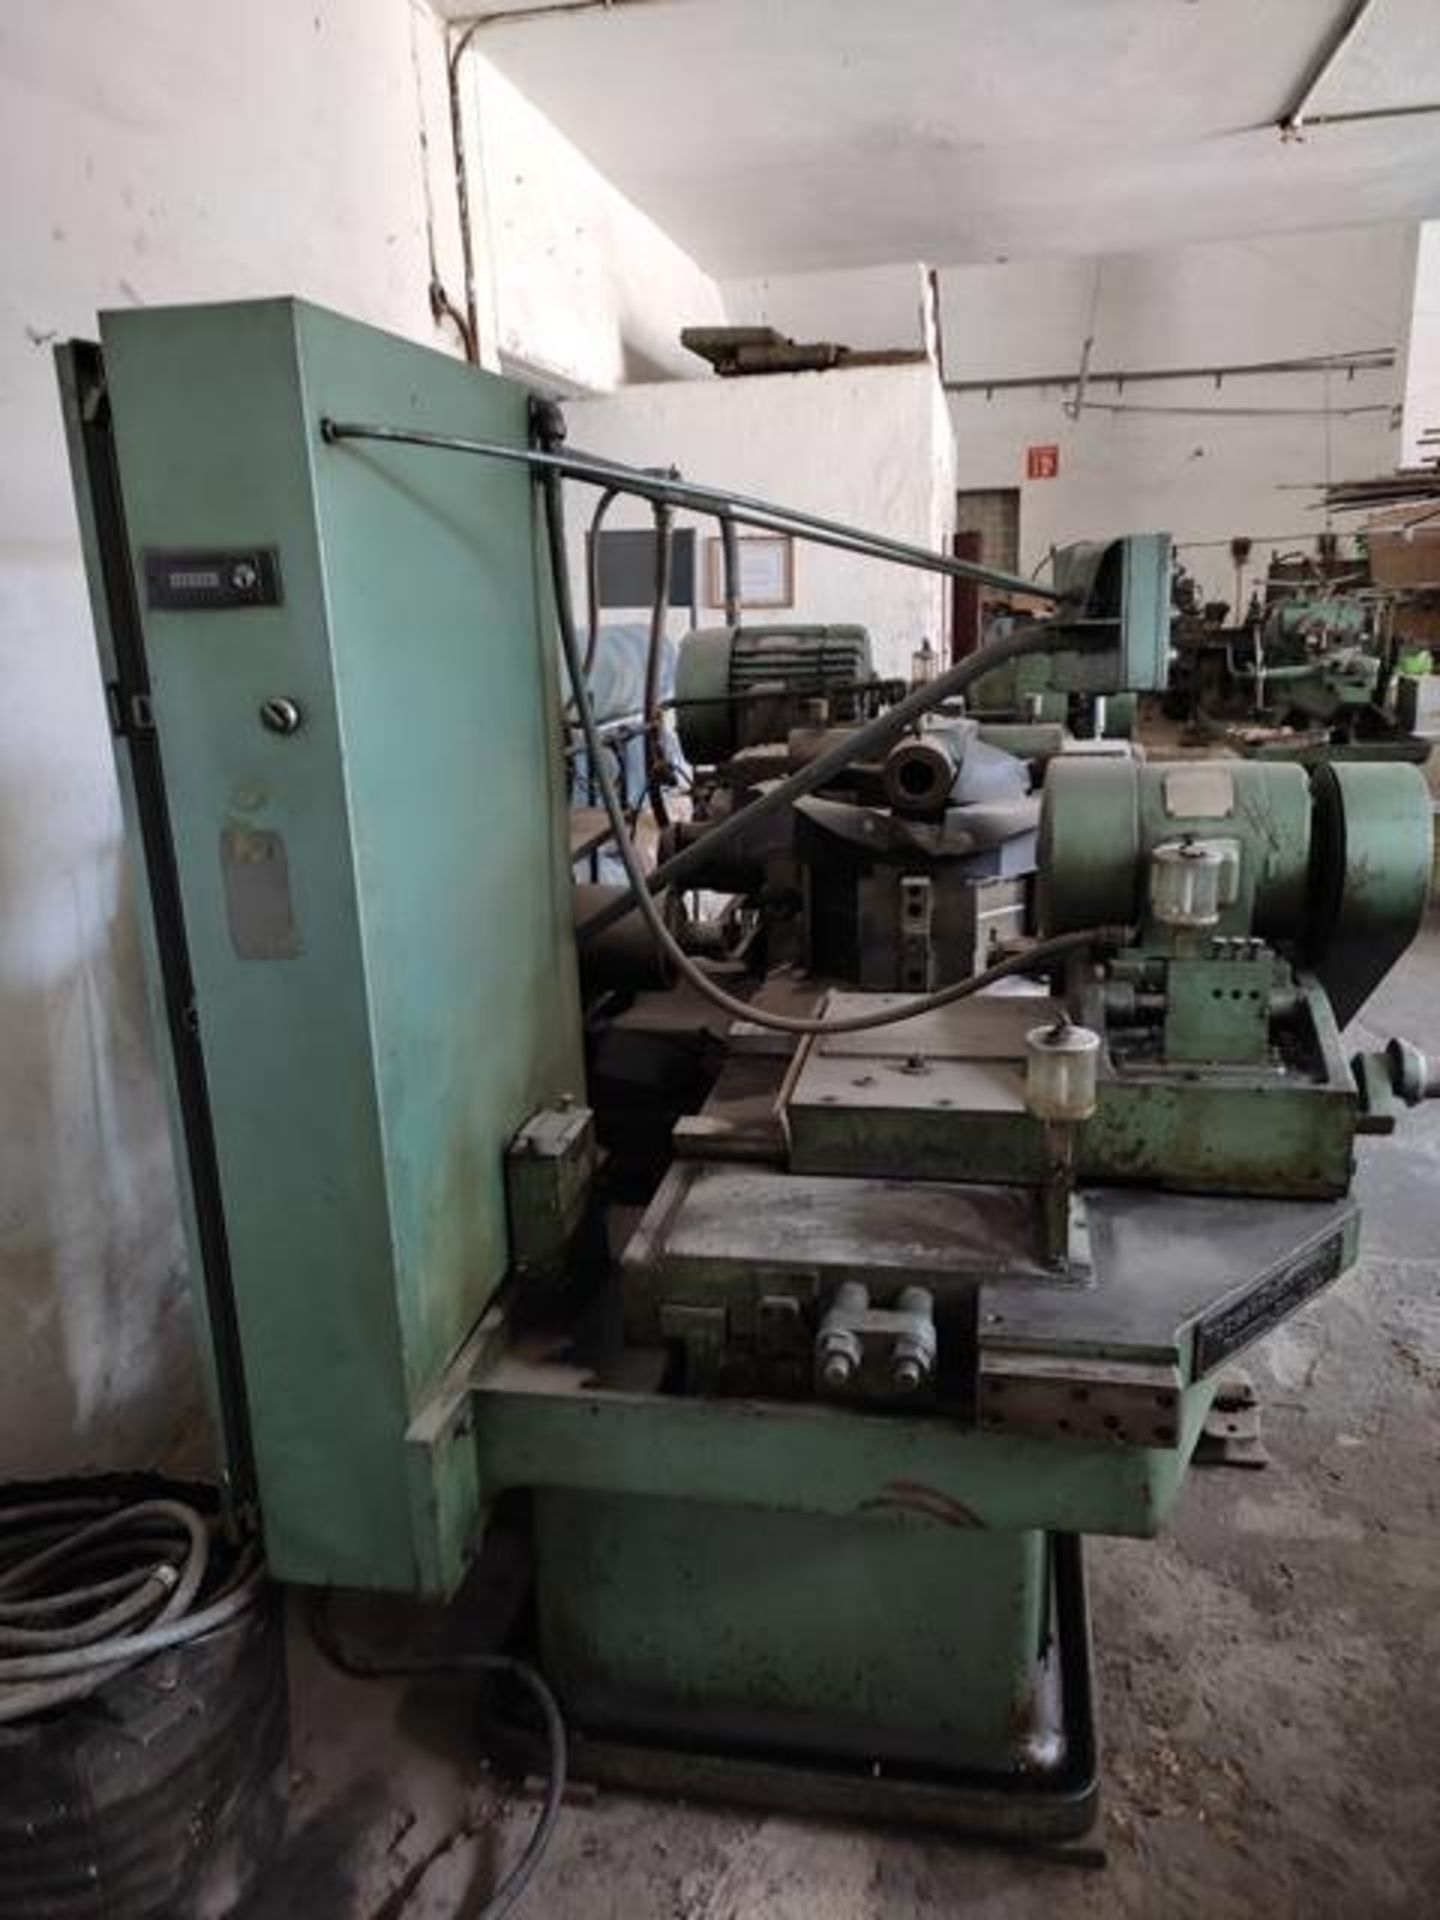 Goss 1-2-3 Chucking Machine, Serial: 2317: 7 Spindle, 3-1/2” Diameter, 4 Chucking Positions with - Image 7 of 26